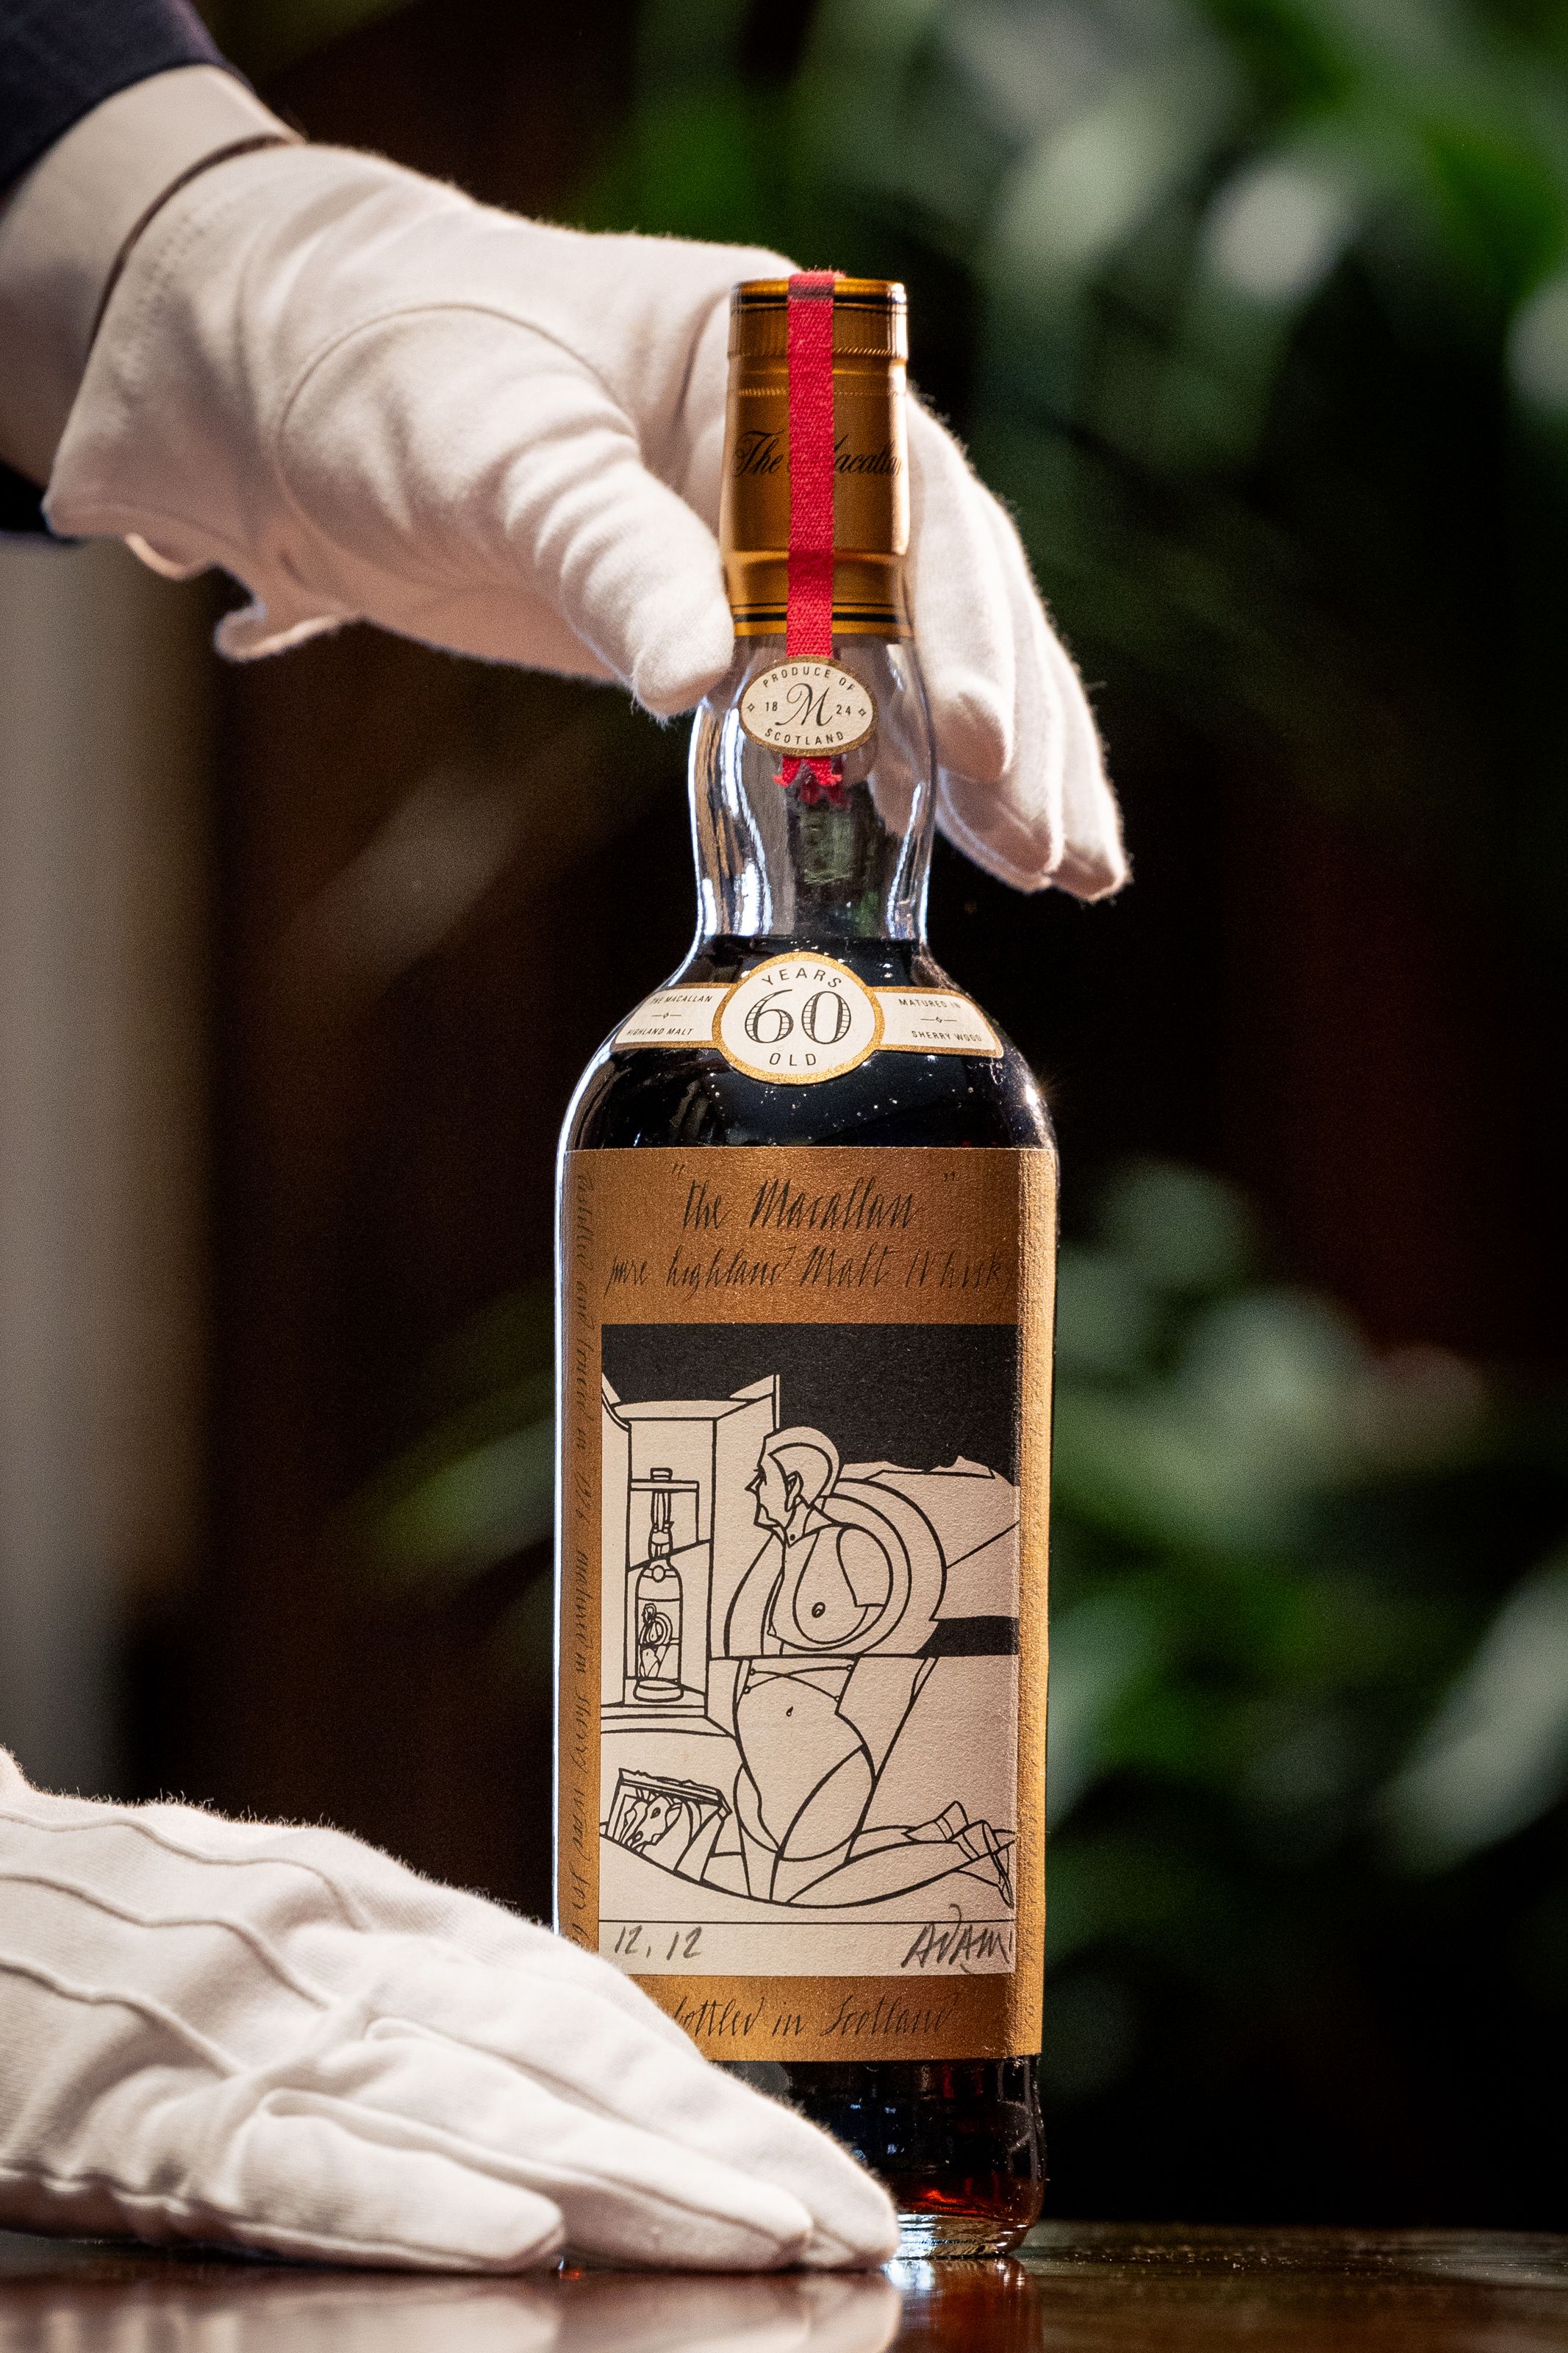 A bottle of The Macallan 1926, the world's most expensive whisky estimated at £750,000- 1,200,000, is unveiled at Sotheby's on October 19, 2023 in London, England. After being aged in sherry casks for six decades, just 40 bottles of The Mcallan 1926 were bottled in 1986. The Mcallan Adami 1926 is one of 12 bottles in the series with a label designed by Italian artist Valerio Adami and is the first bottle to have undergone reconditioning by The Mcallan Distillery ahead of being presented at auction at Sotheby's in London on November 18, 2023.